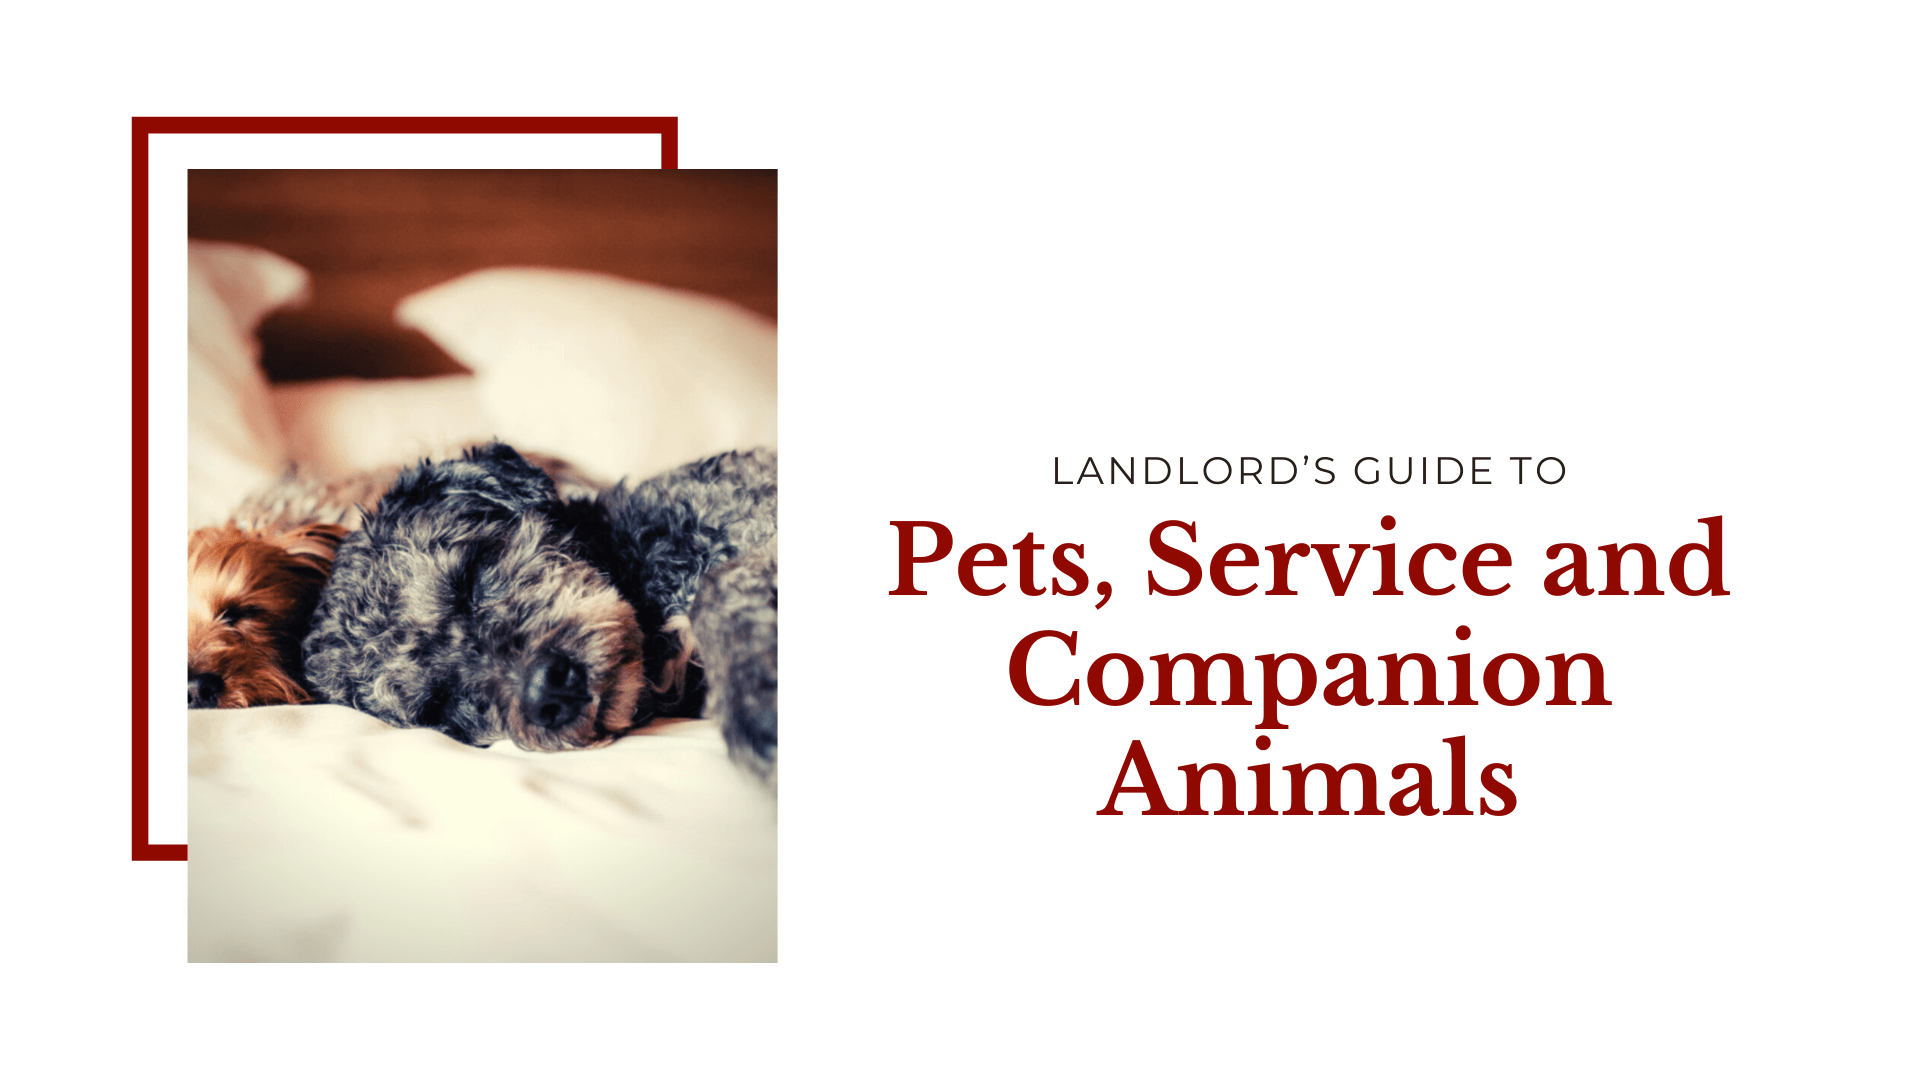 Landlord’s Guide to Pets, Service and Companion Animals | Indianapolis Property Management